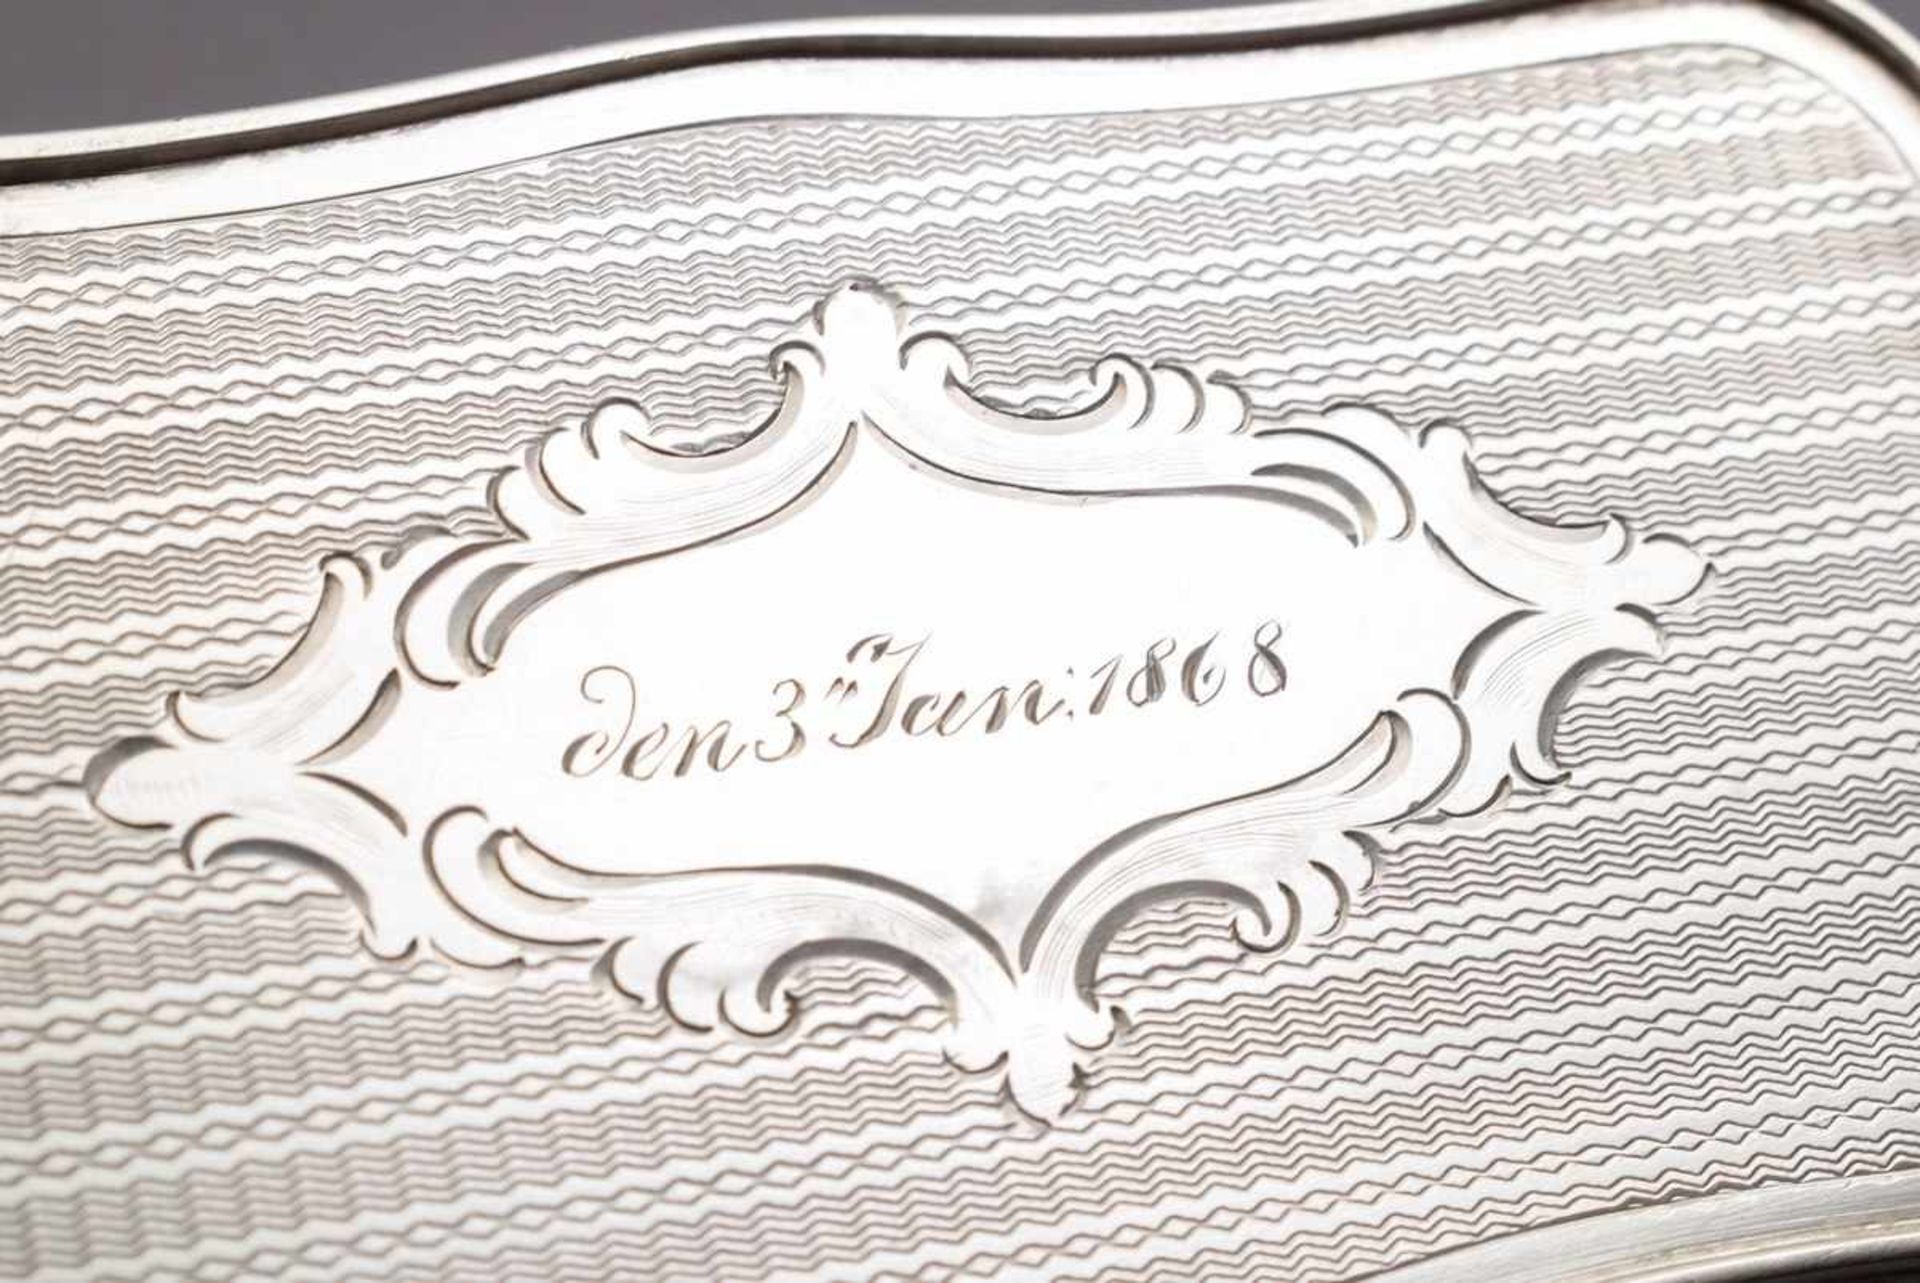 Austrian tabatiere with floral engraved corpus, on the bottom date engraving "den 3. Jan: 1868", MM: - Bild 3 aus 6